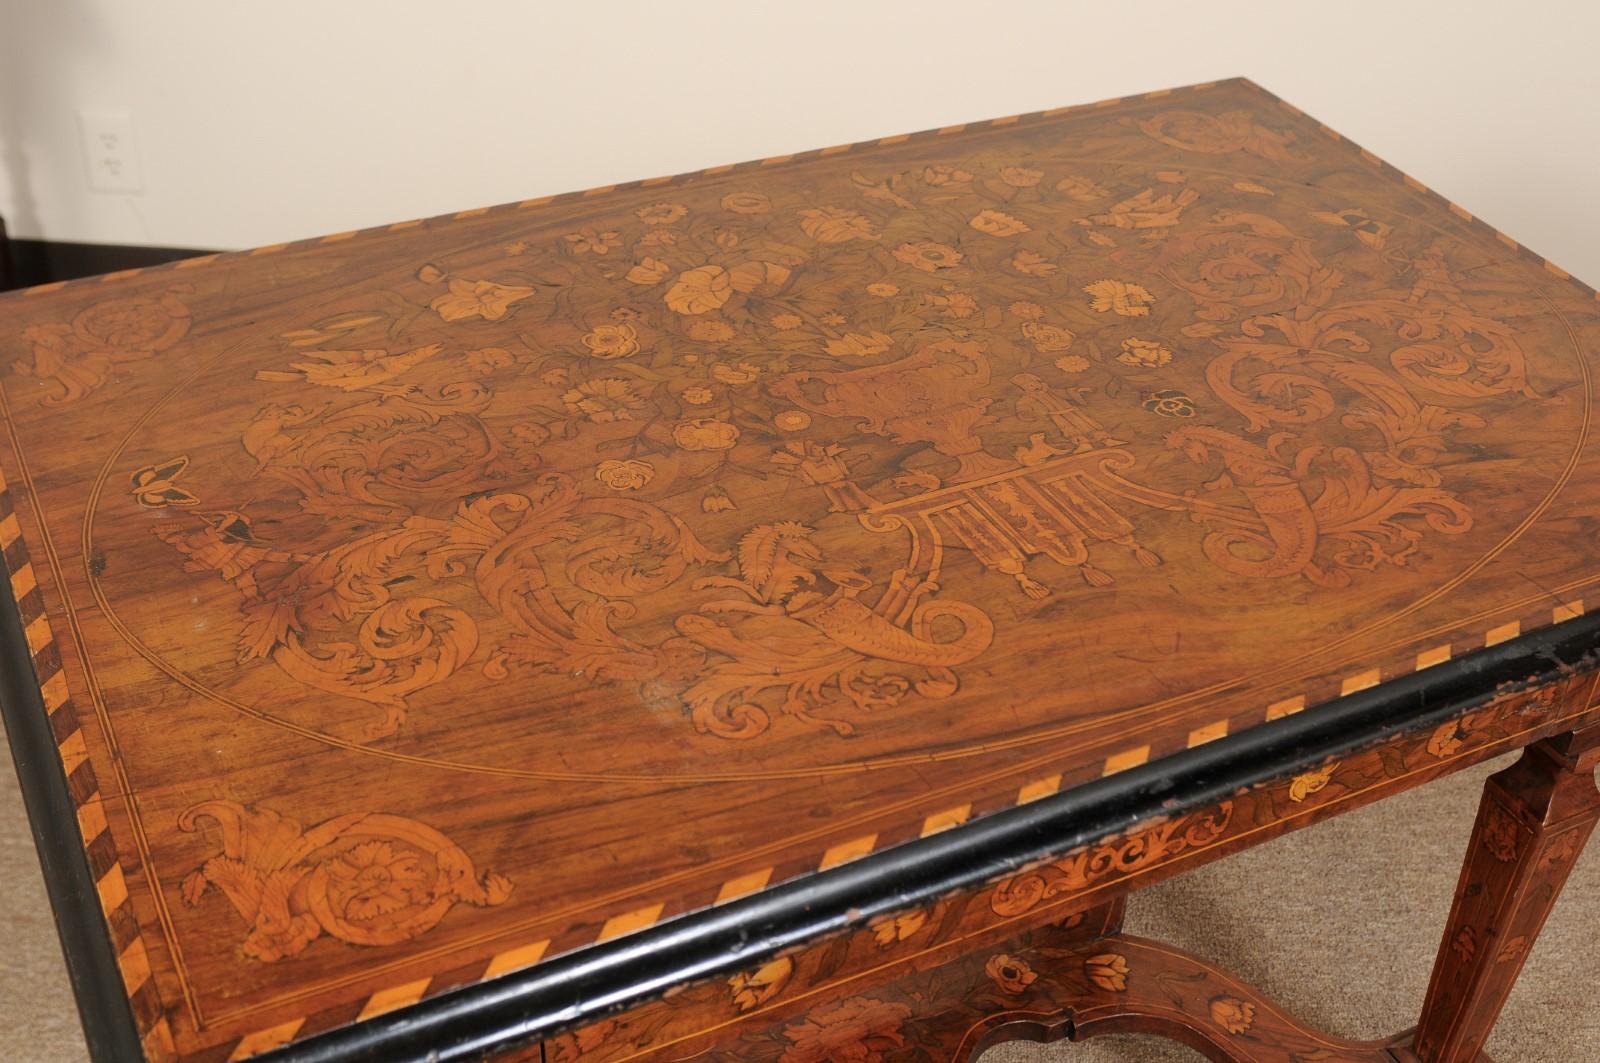 A 19th century continental rectangular form center table featuring marquetry inlay with foliage, flowers, birds and figures. The ebonized boarder top above single large drawer in frieze and stretcher below joined by square tapering legs ending in